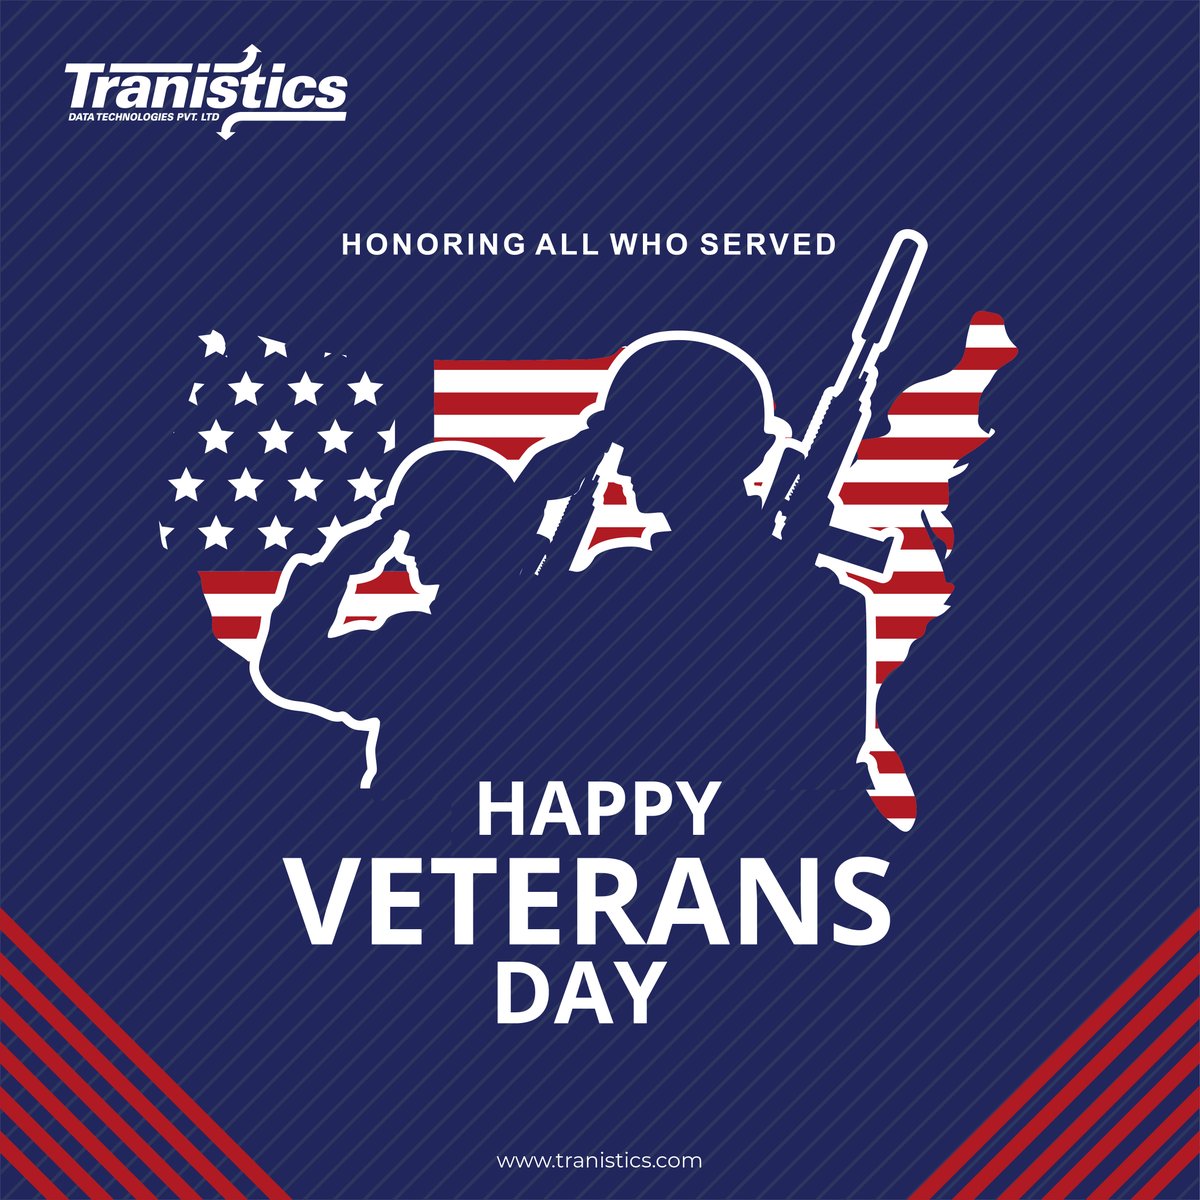 Today and every day, we pause to thank and honor the brave heroes who have served our country. We at #Tranistics give a big salute to all of our veterans on this Veterans Day! 
#VeteransDay #Tranistics #trustedbusinesspartner #logistics #publishing